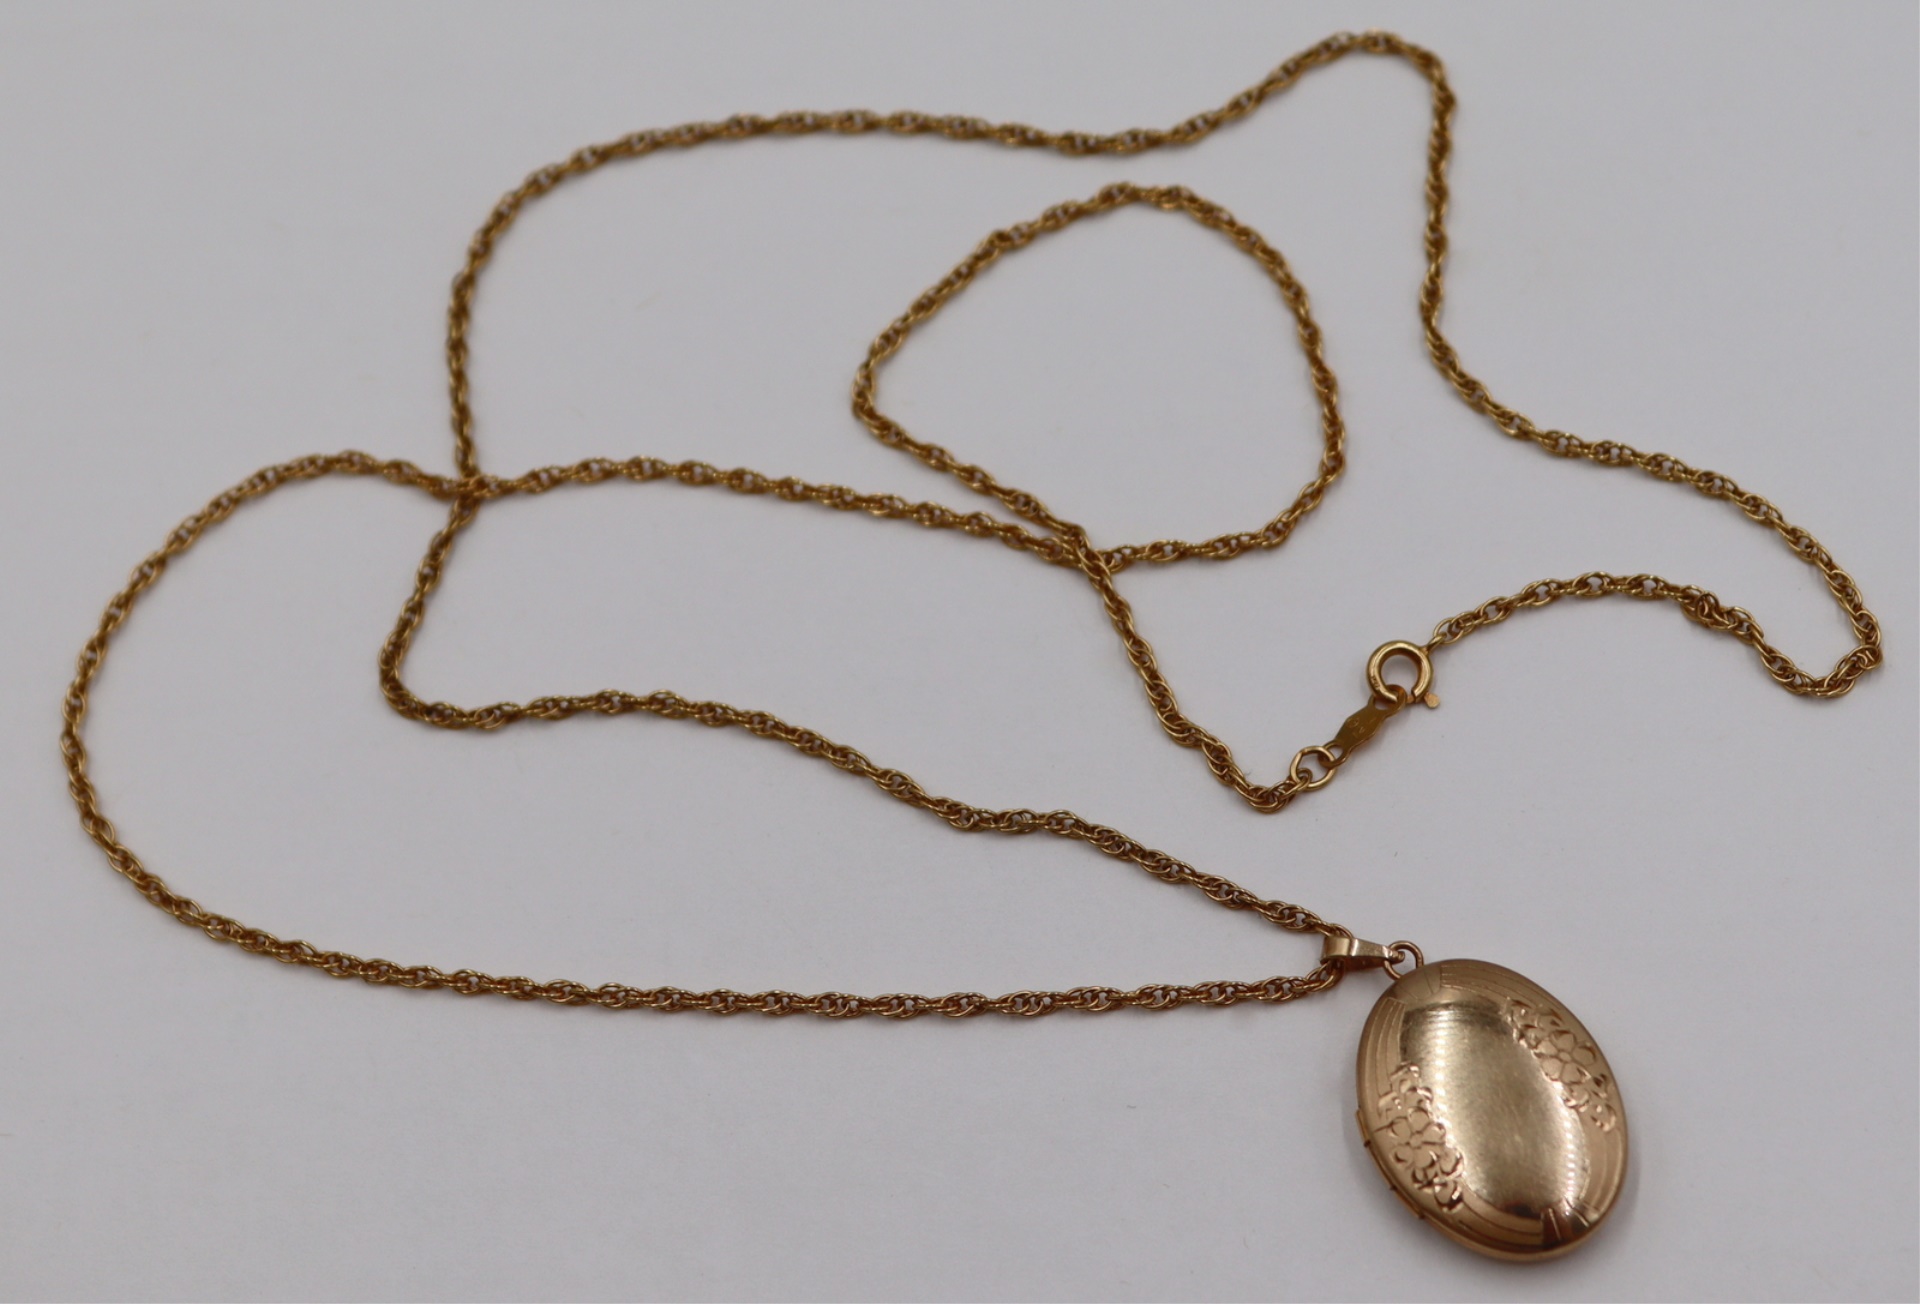 JEWELRY. 14KT GOLD LOCKET AND CHAIN